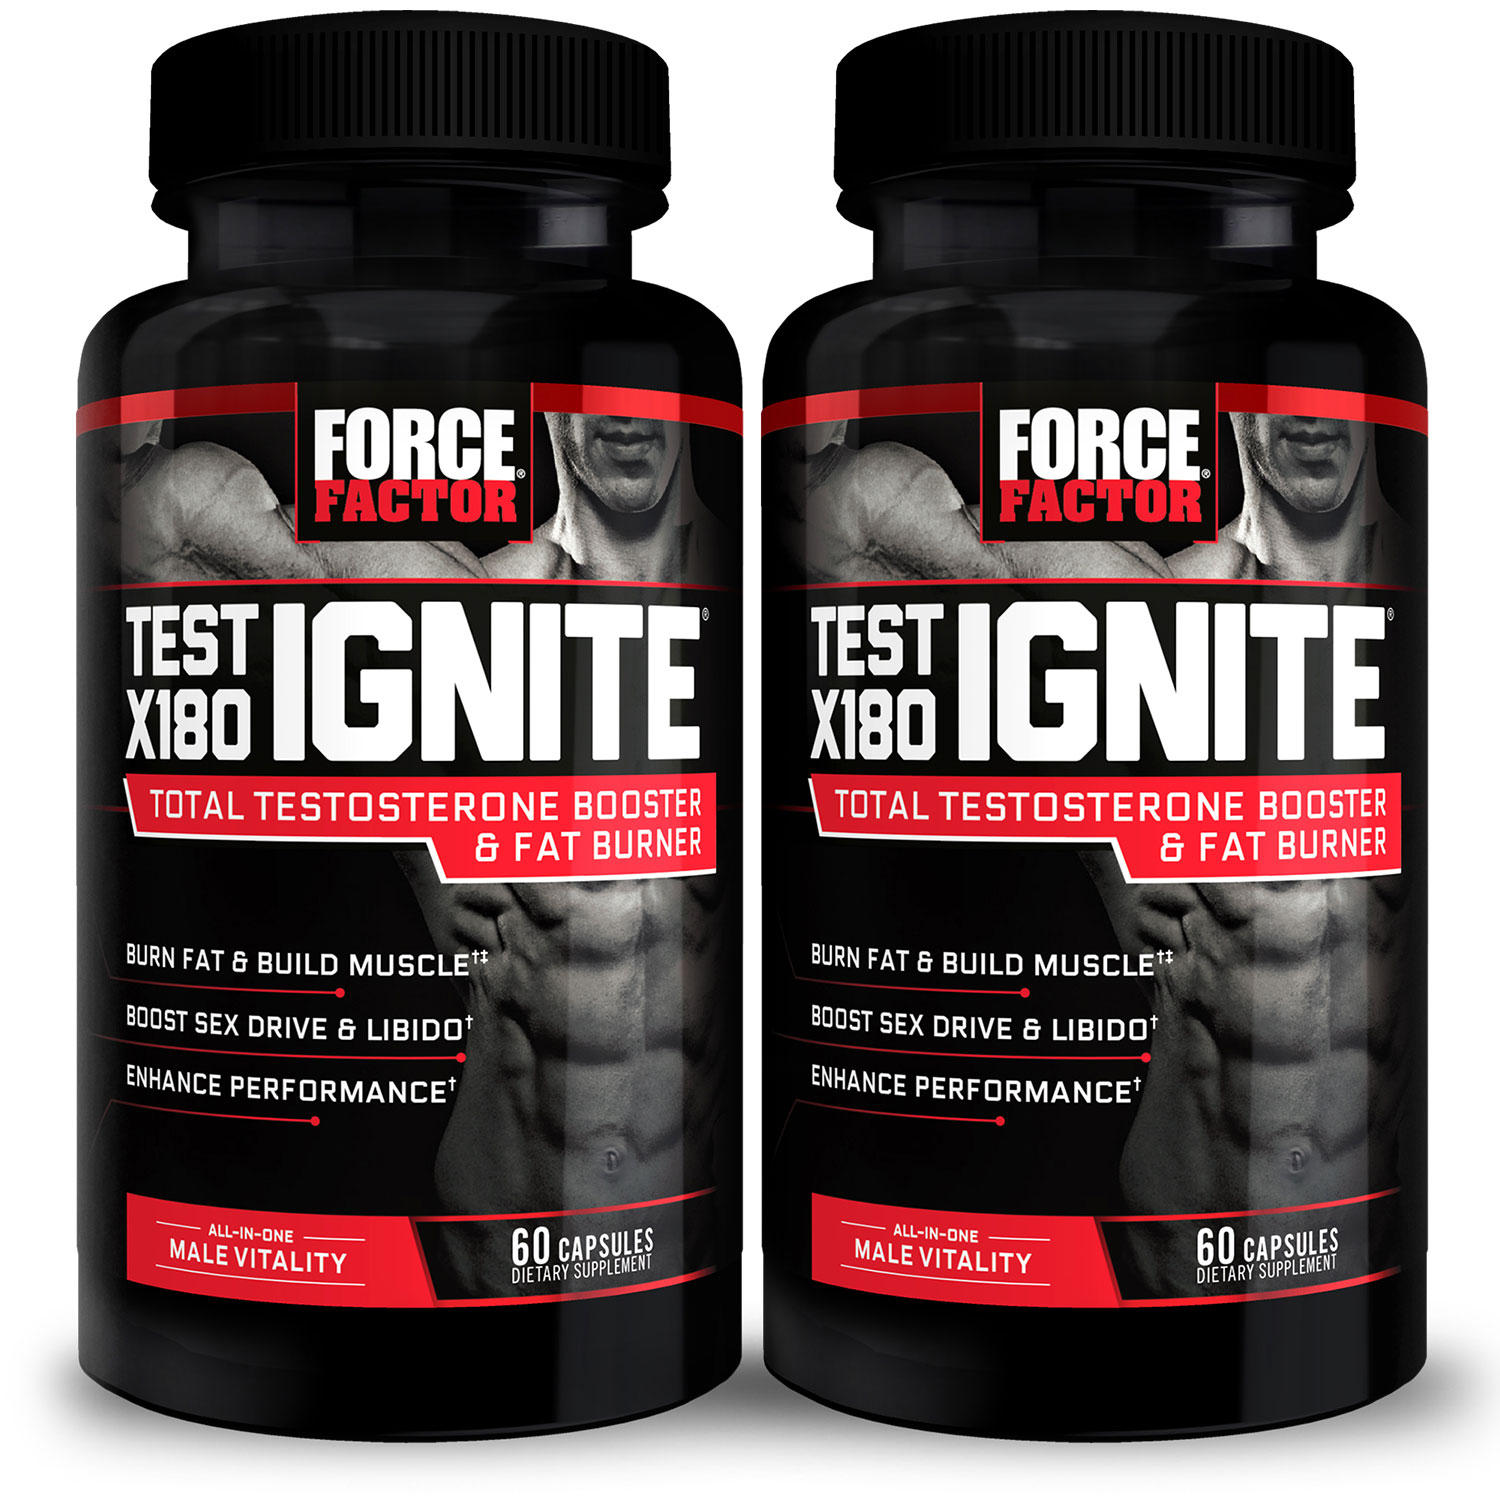 Force Factor Test X180 Ignite Total Testosterone Booster for Men with Fenugreek Seed and Green Tea Extract to Build Lean Muscle Boost Energy and Improve Athletic Performance Capsules, Black, 120 Count (B08MRWXZ69) - 818594015122